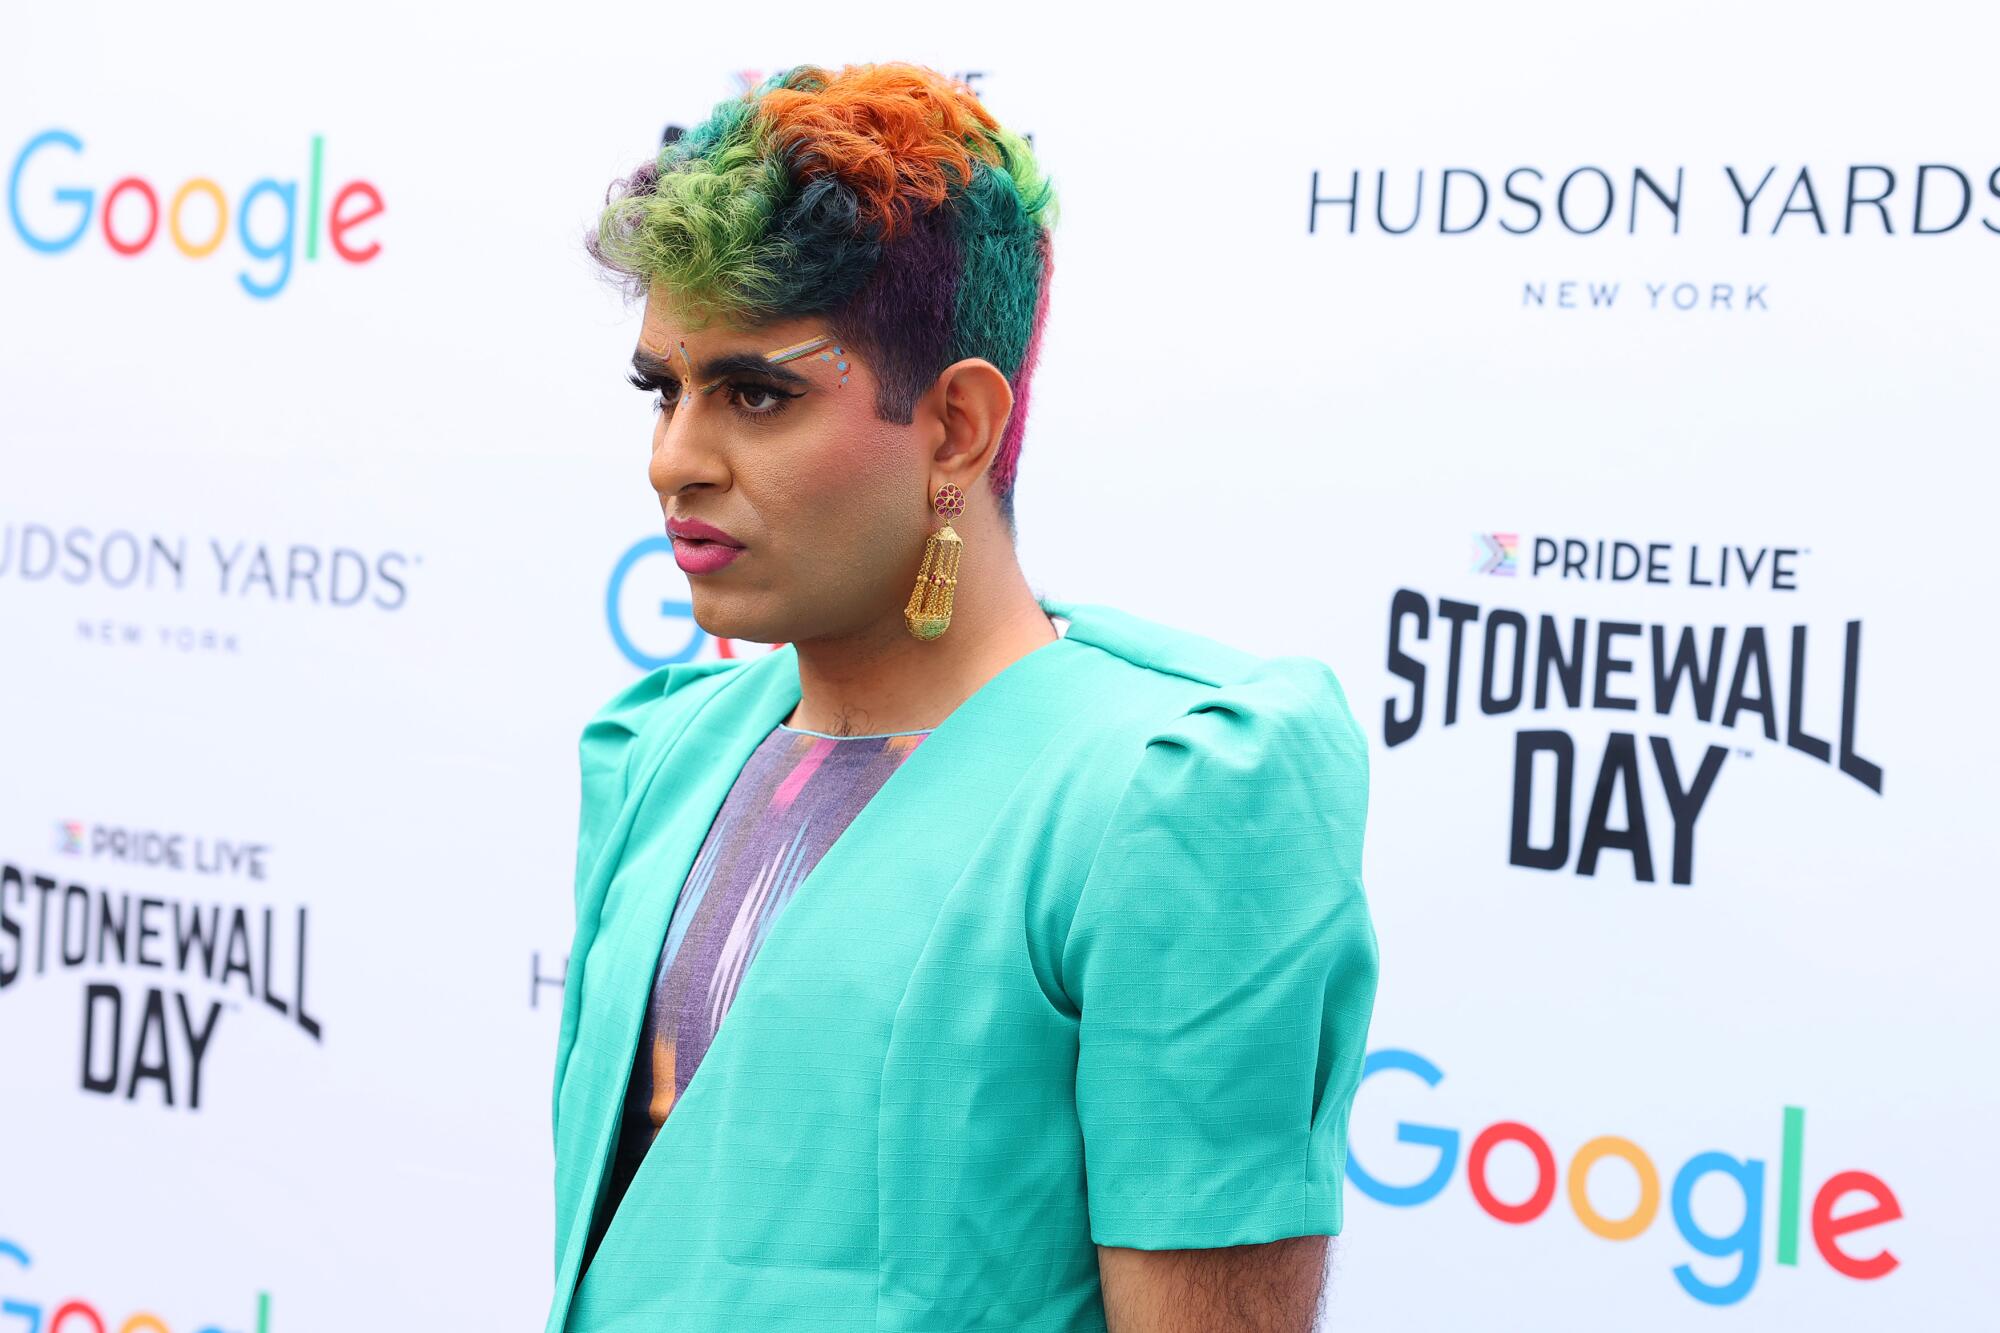 A person with multicolored hair.